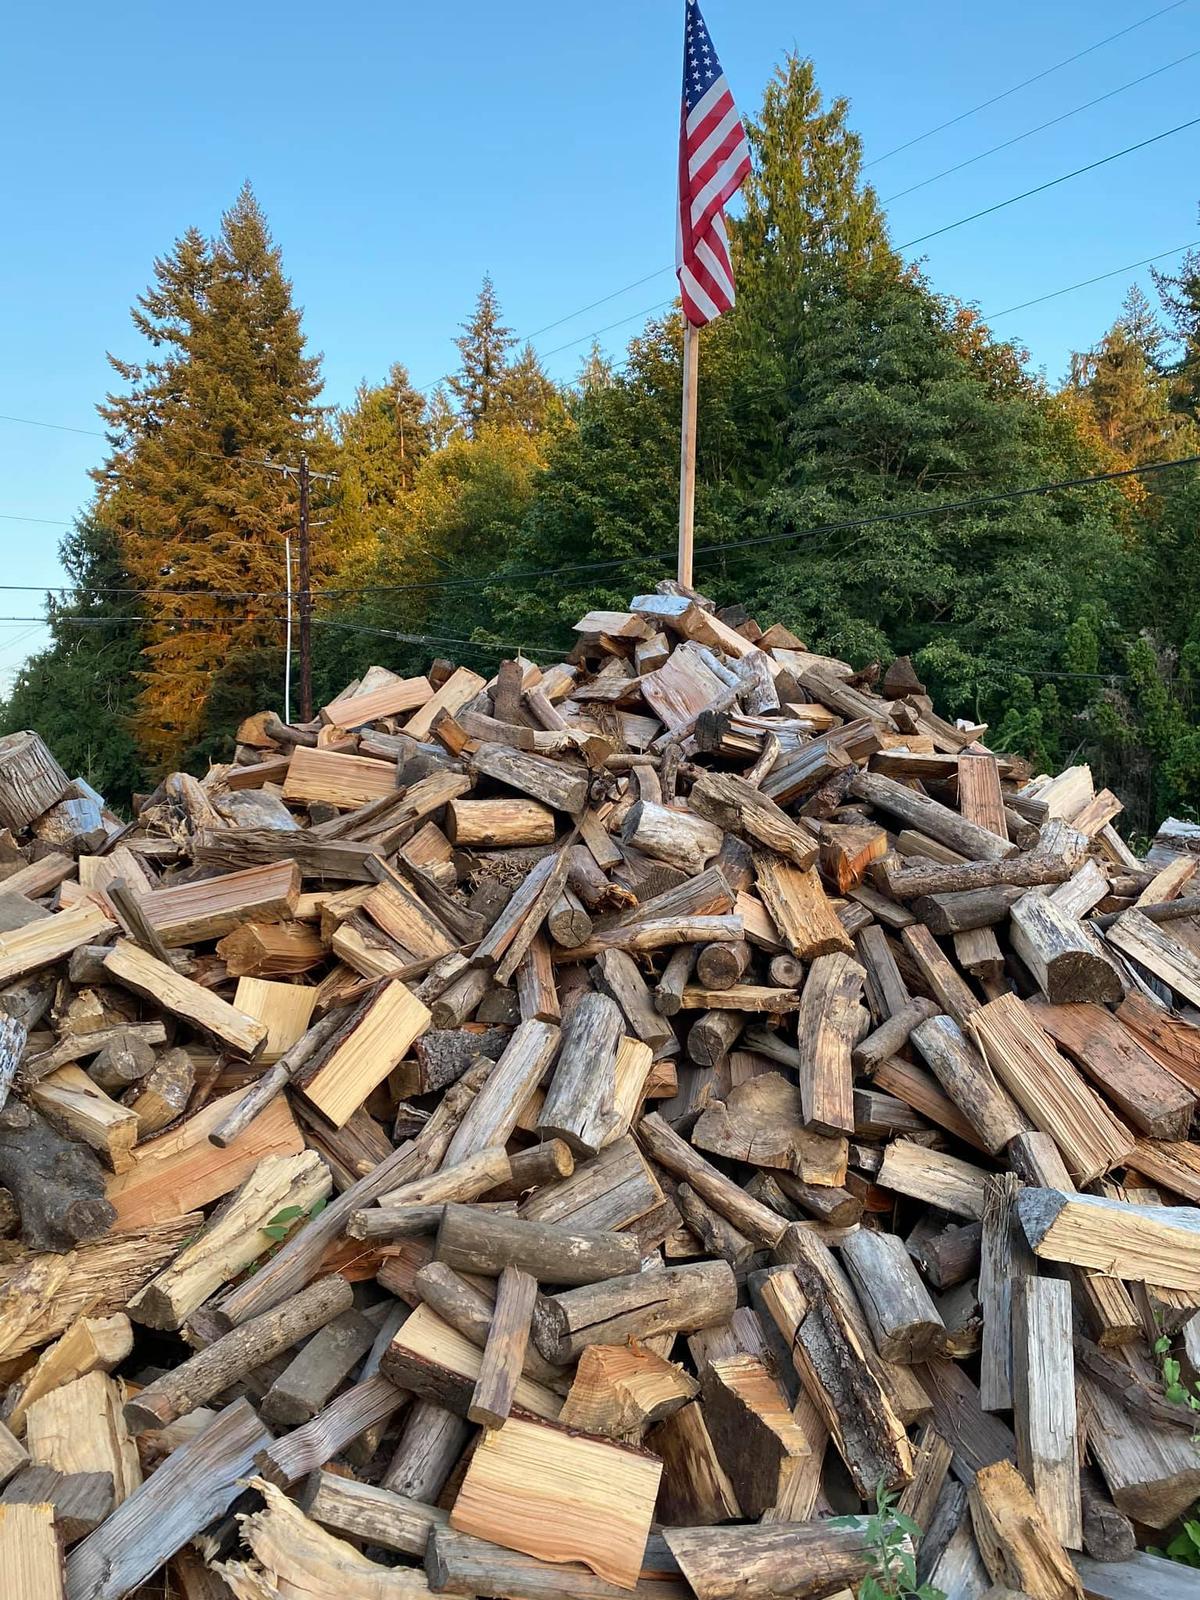 The annual pile of split wood, with an American flag on top, has become a popular place to take selfies. (Courtesy of Shane McDaniel)